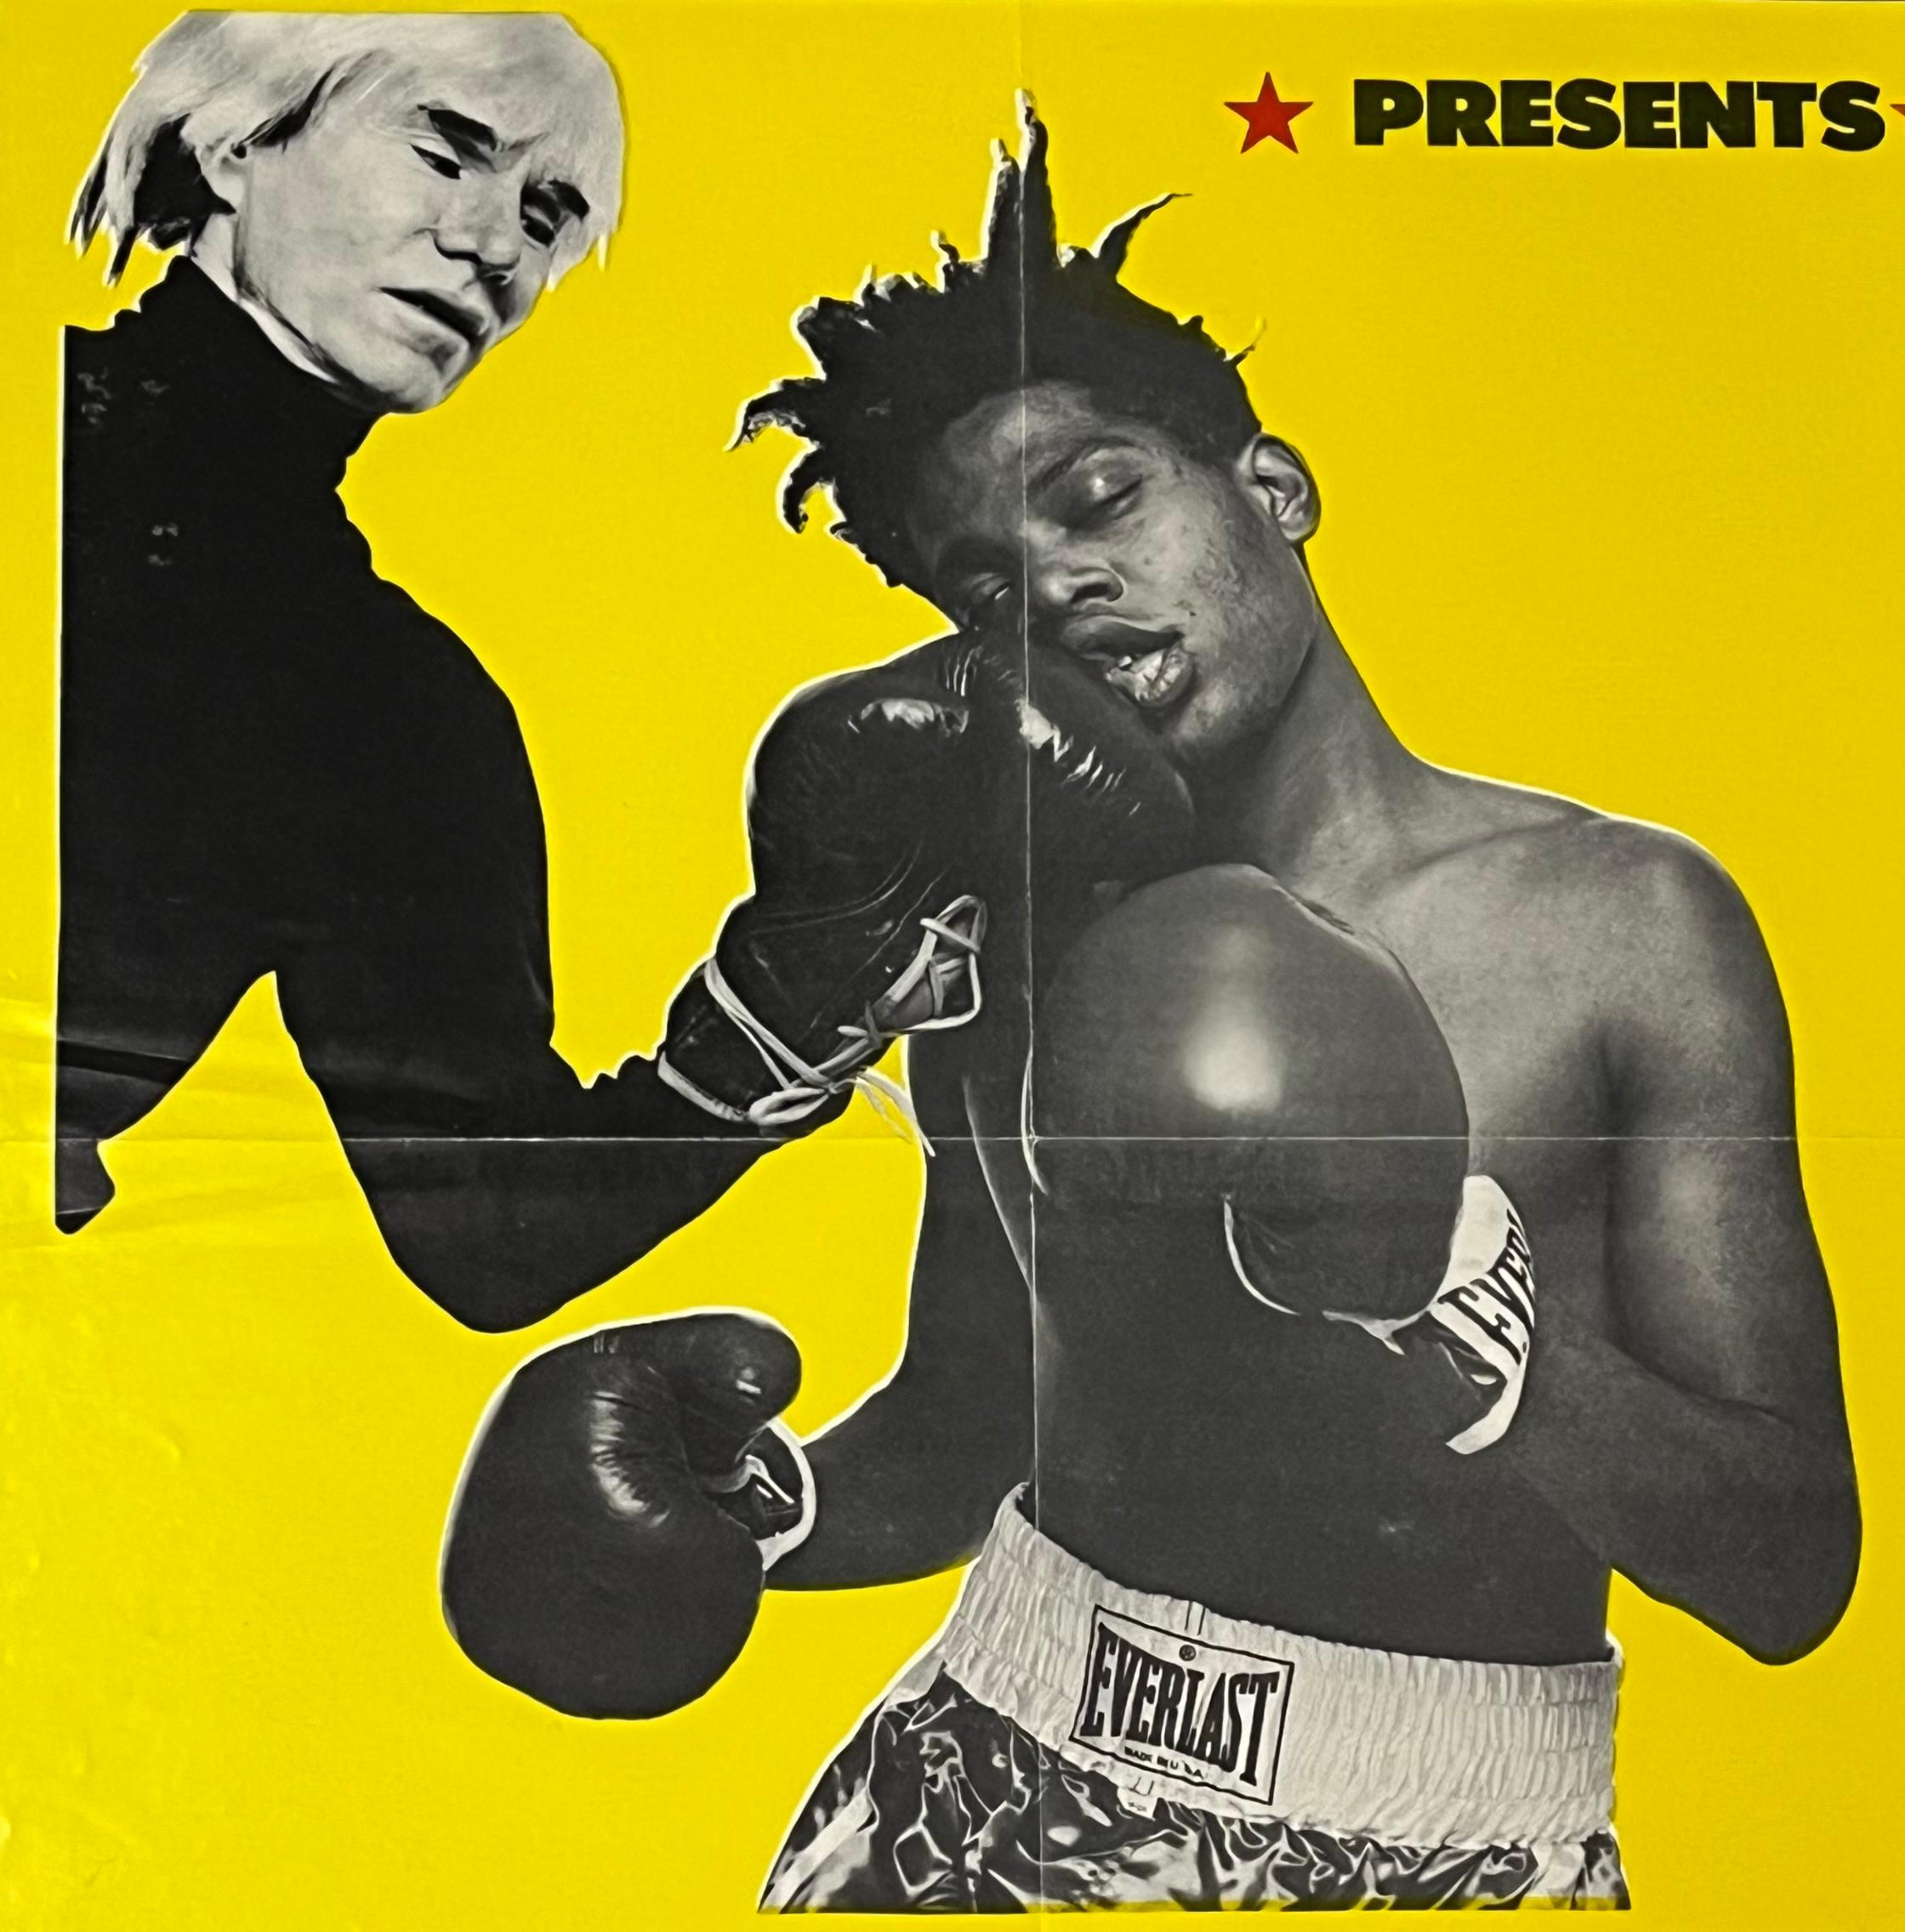 Andy Warhol Jean-Michel Basquiat Boxing posters 1985: Complete set of 2 works: 
The most sought-after Basquiat/Warhol collectibles in existence - presented as a complete set of 2. Published by Tony Shafrazi and Bruno Bischofberger on the occasion of